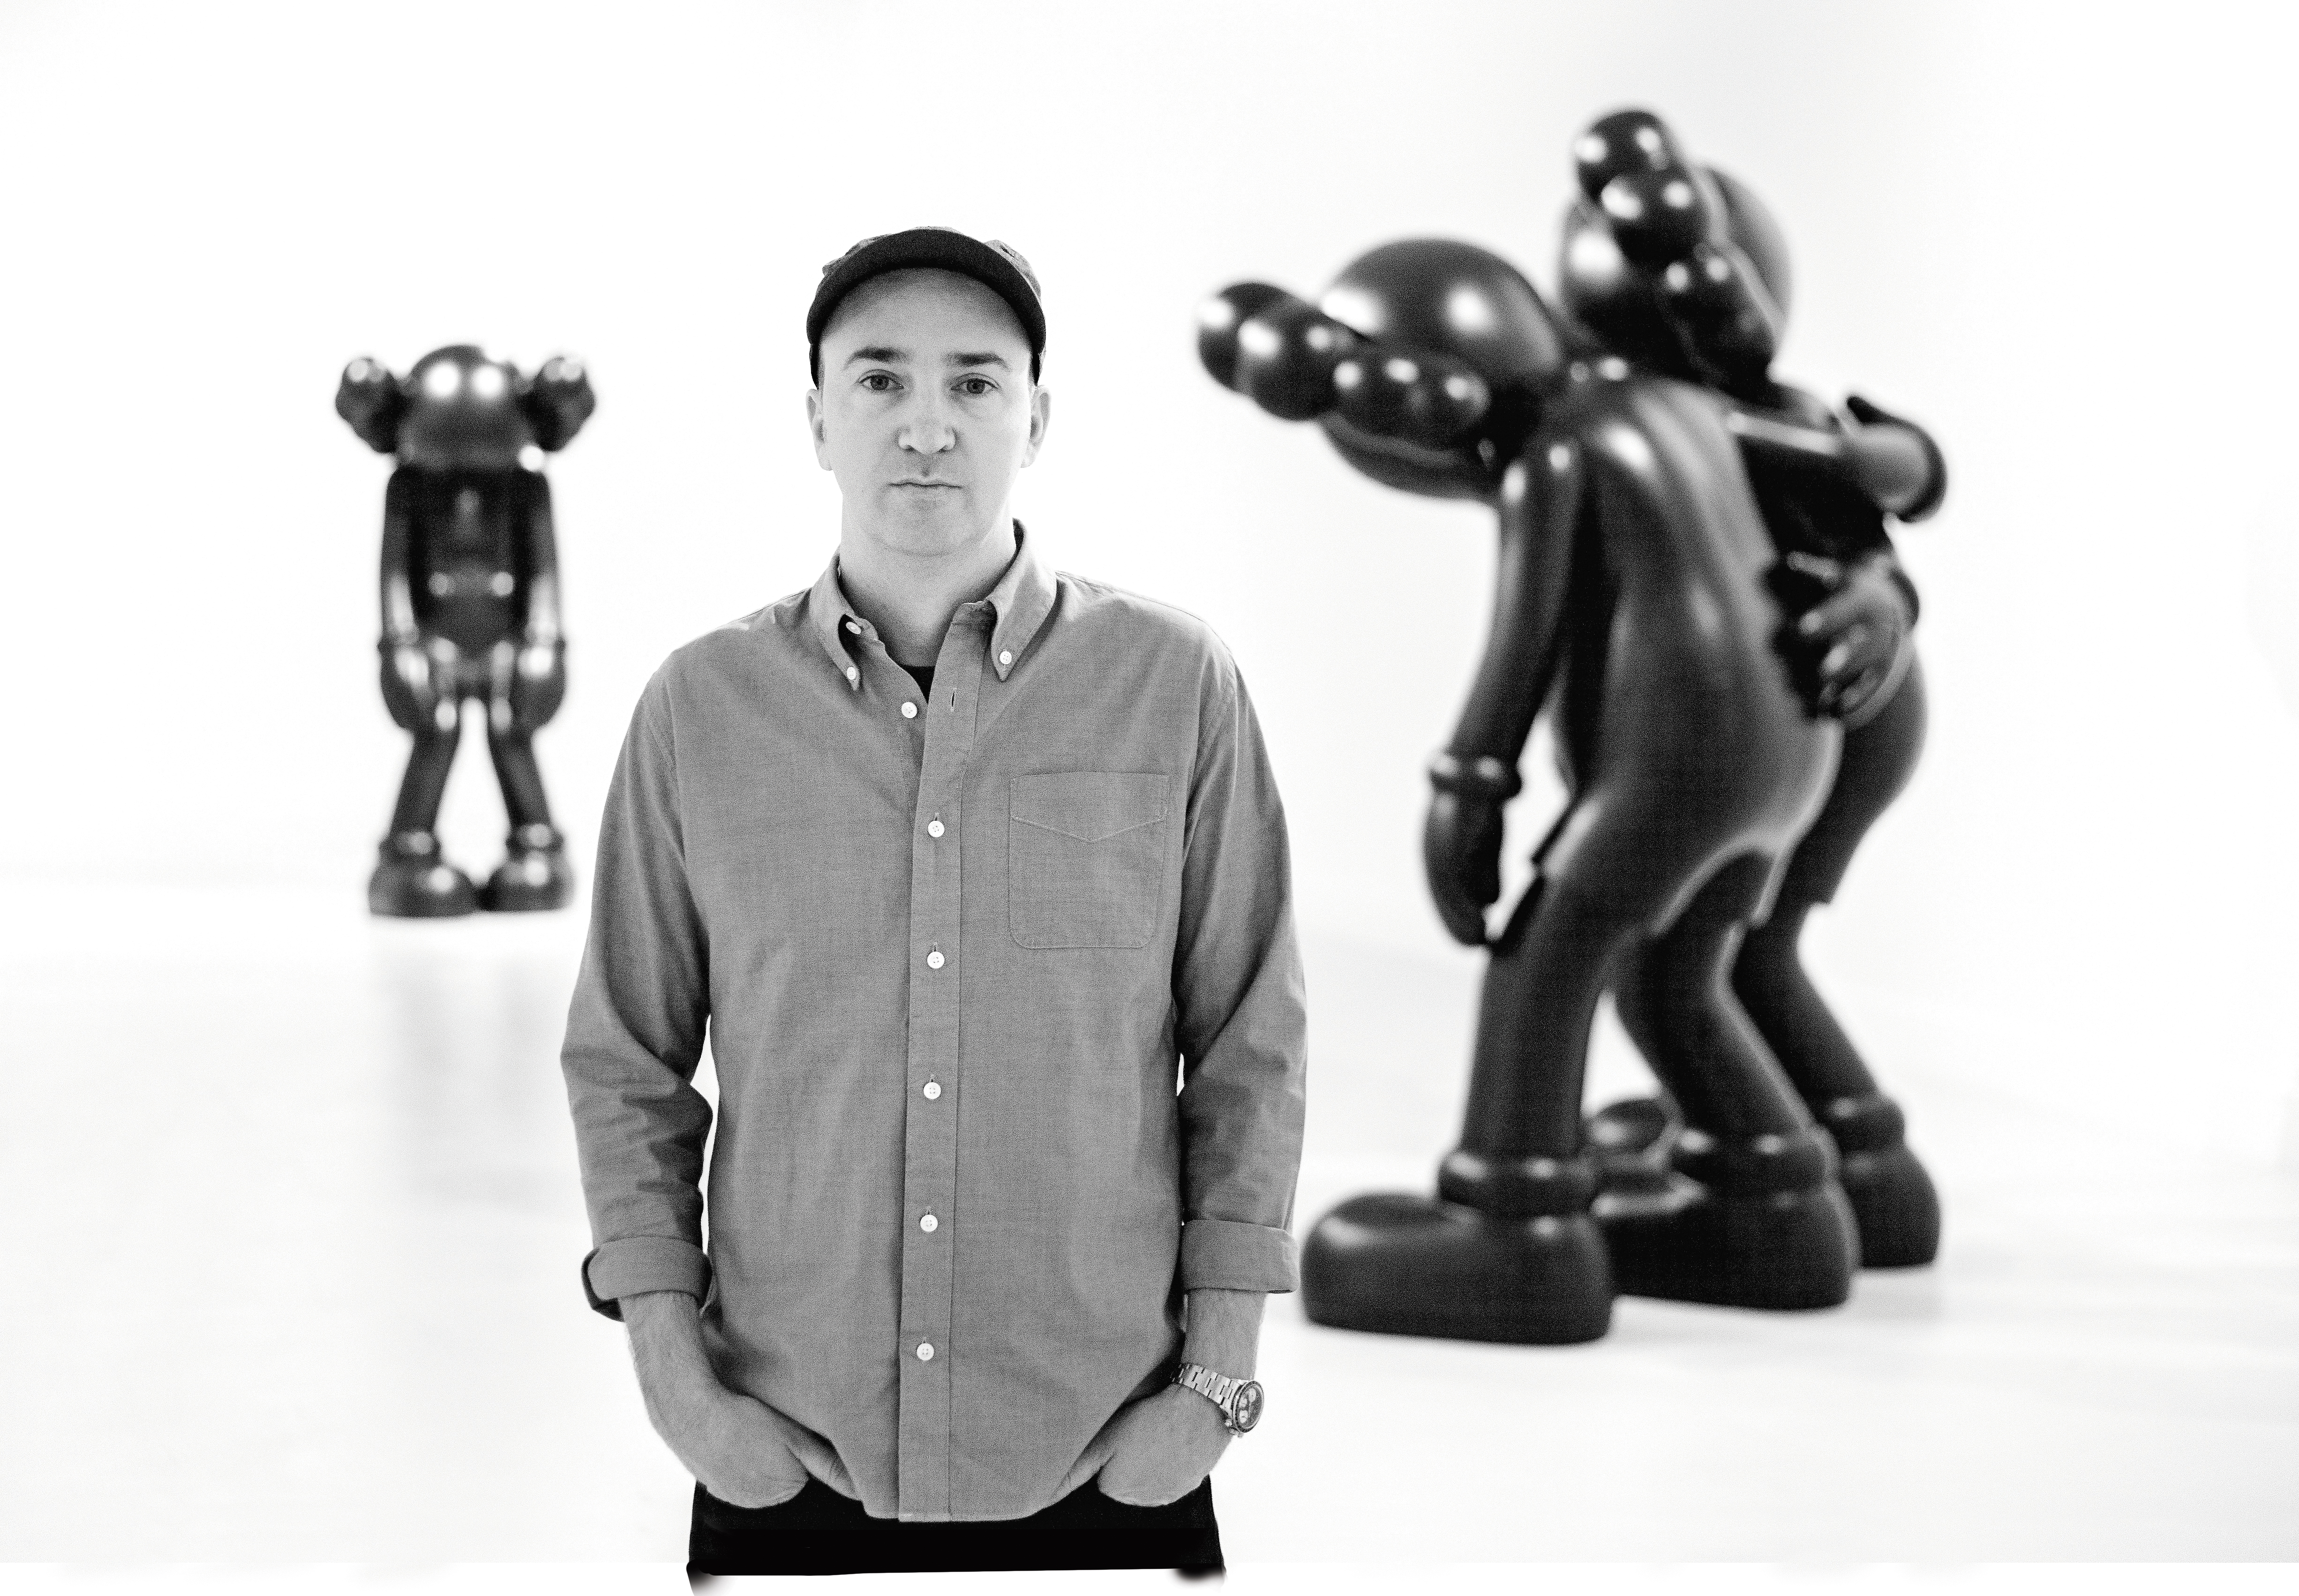 Brooklyn-based artist Brian Donnelly—a.k.a. KAWS—with his sculptures Small Lie (left) and Along the Way.